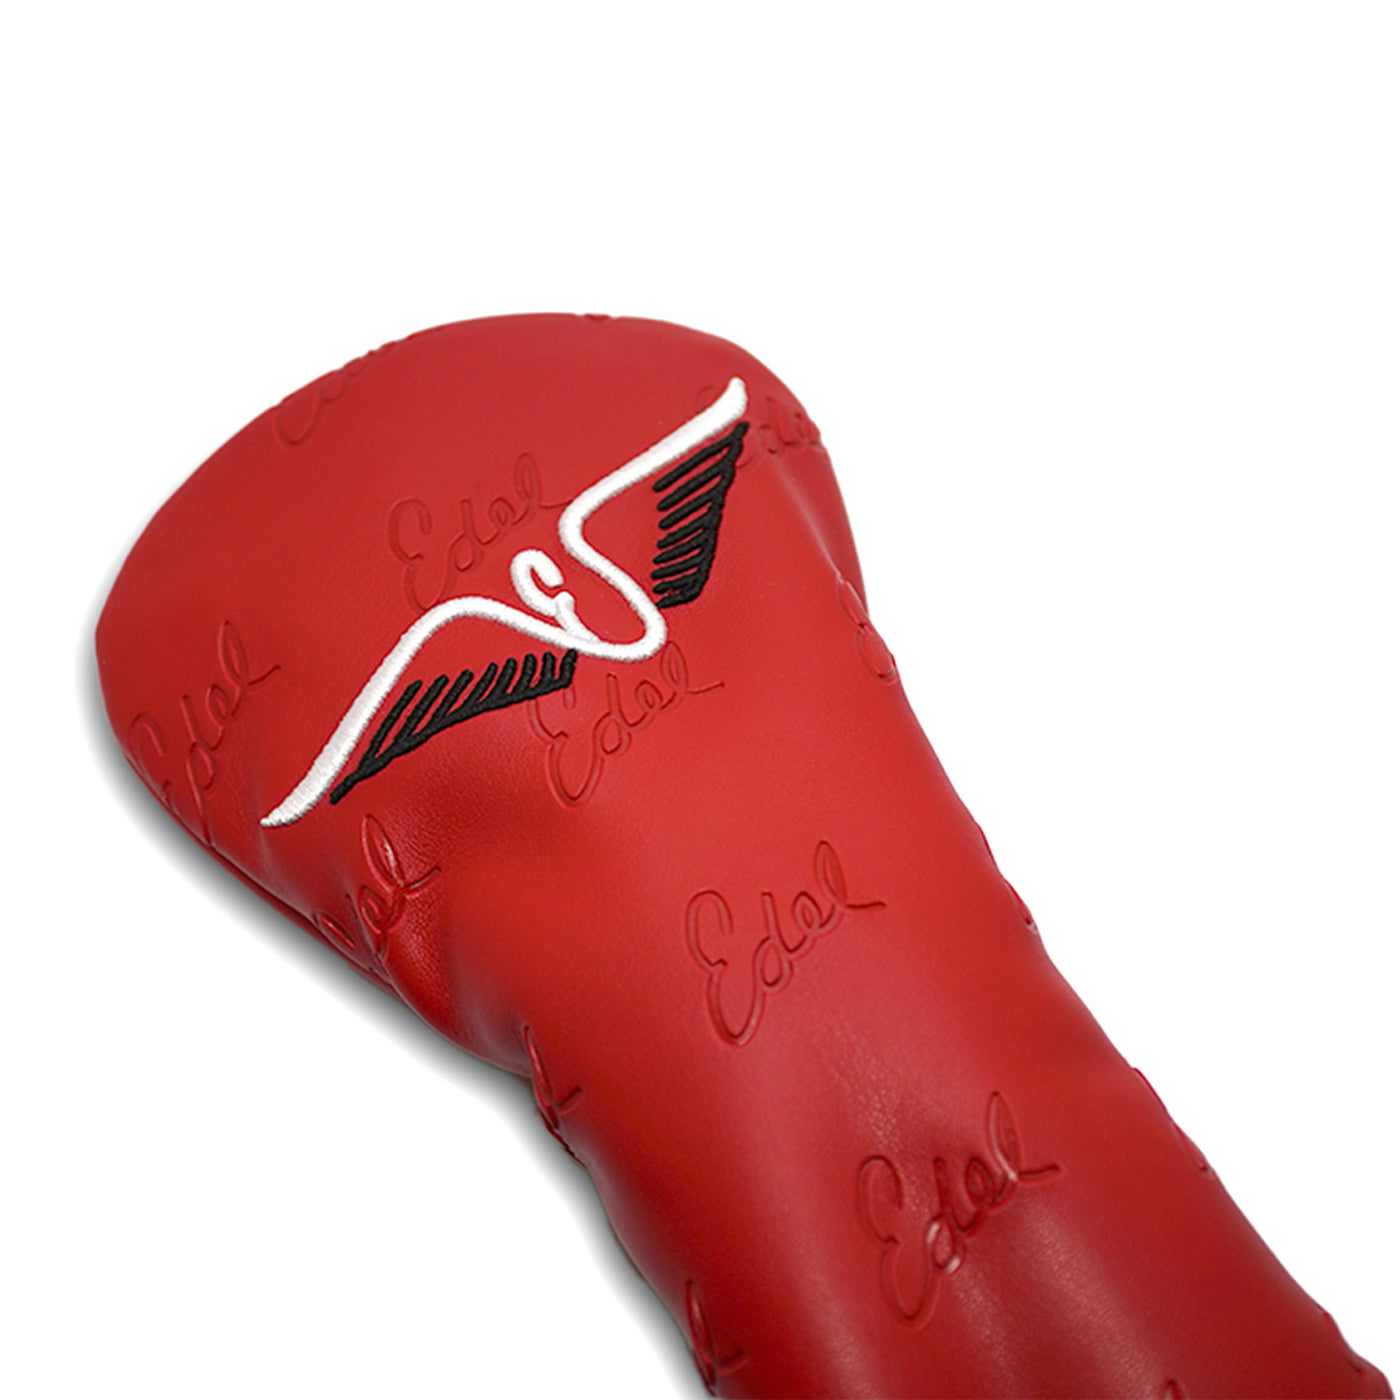 Edel Golf Hybrid Headcover Red Close-Up